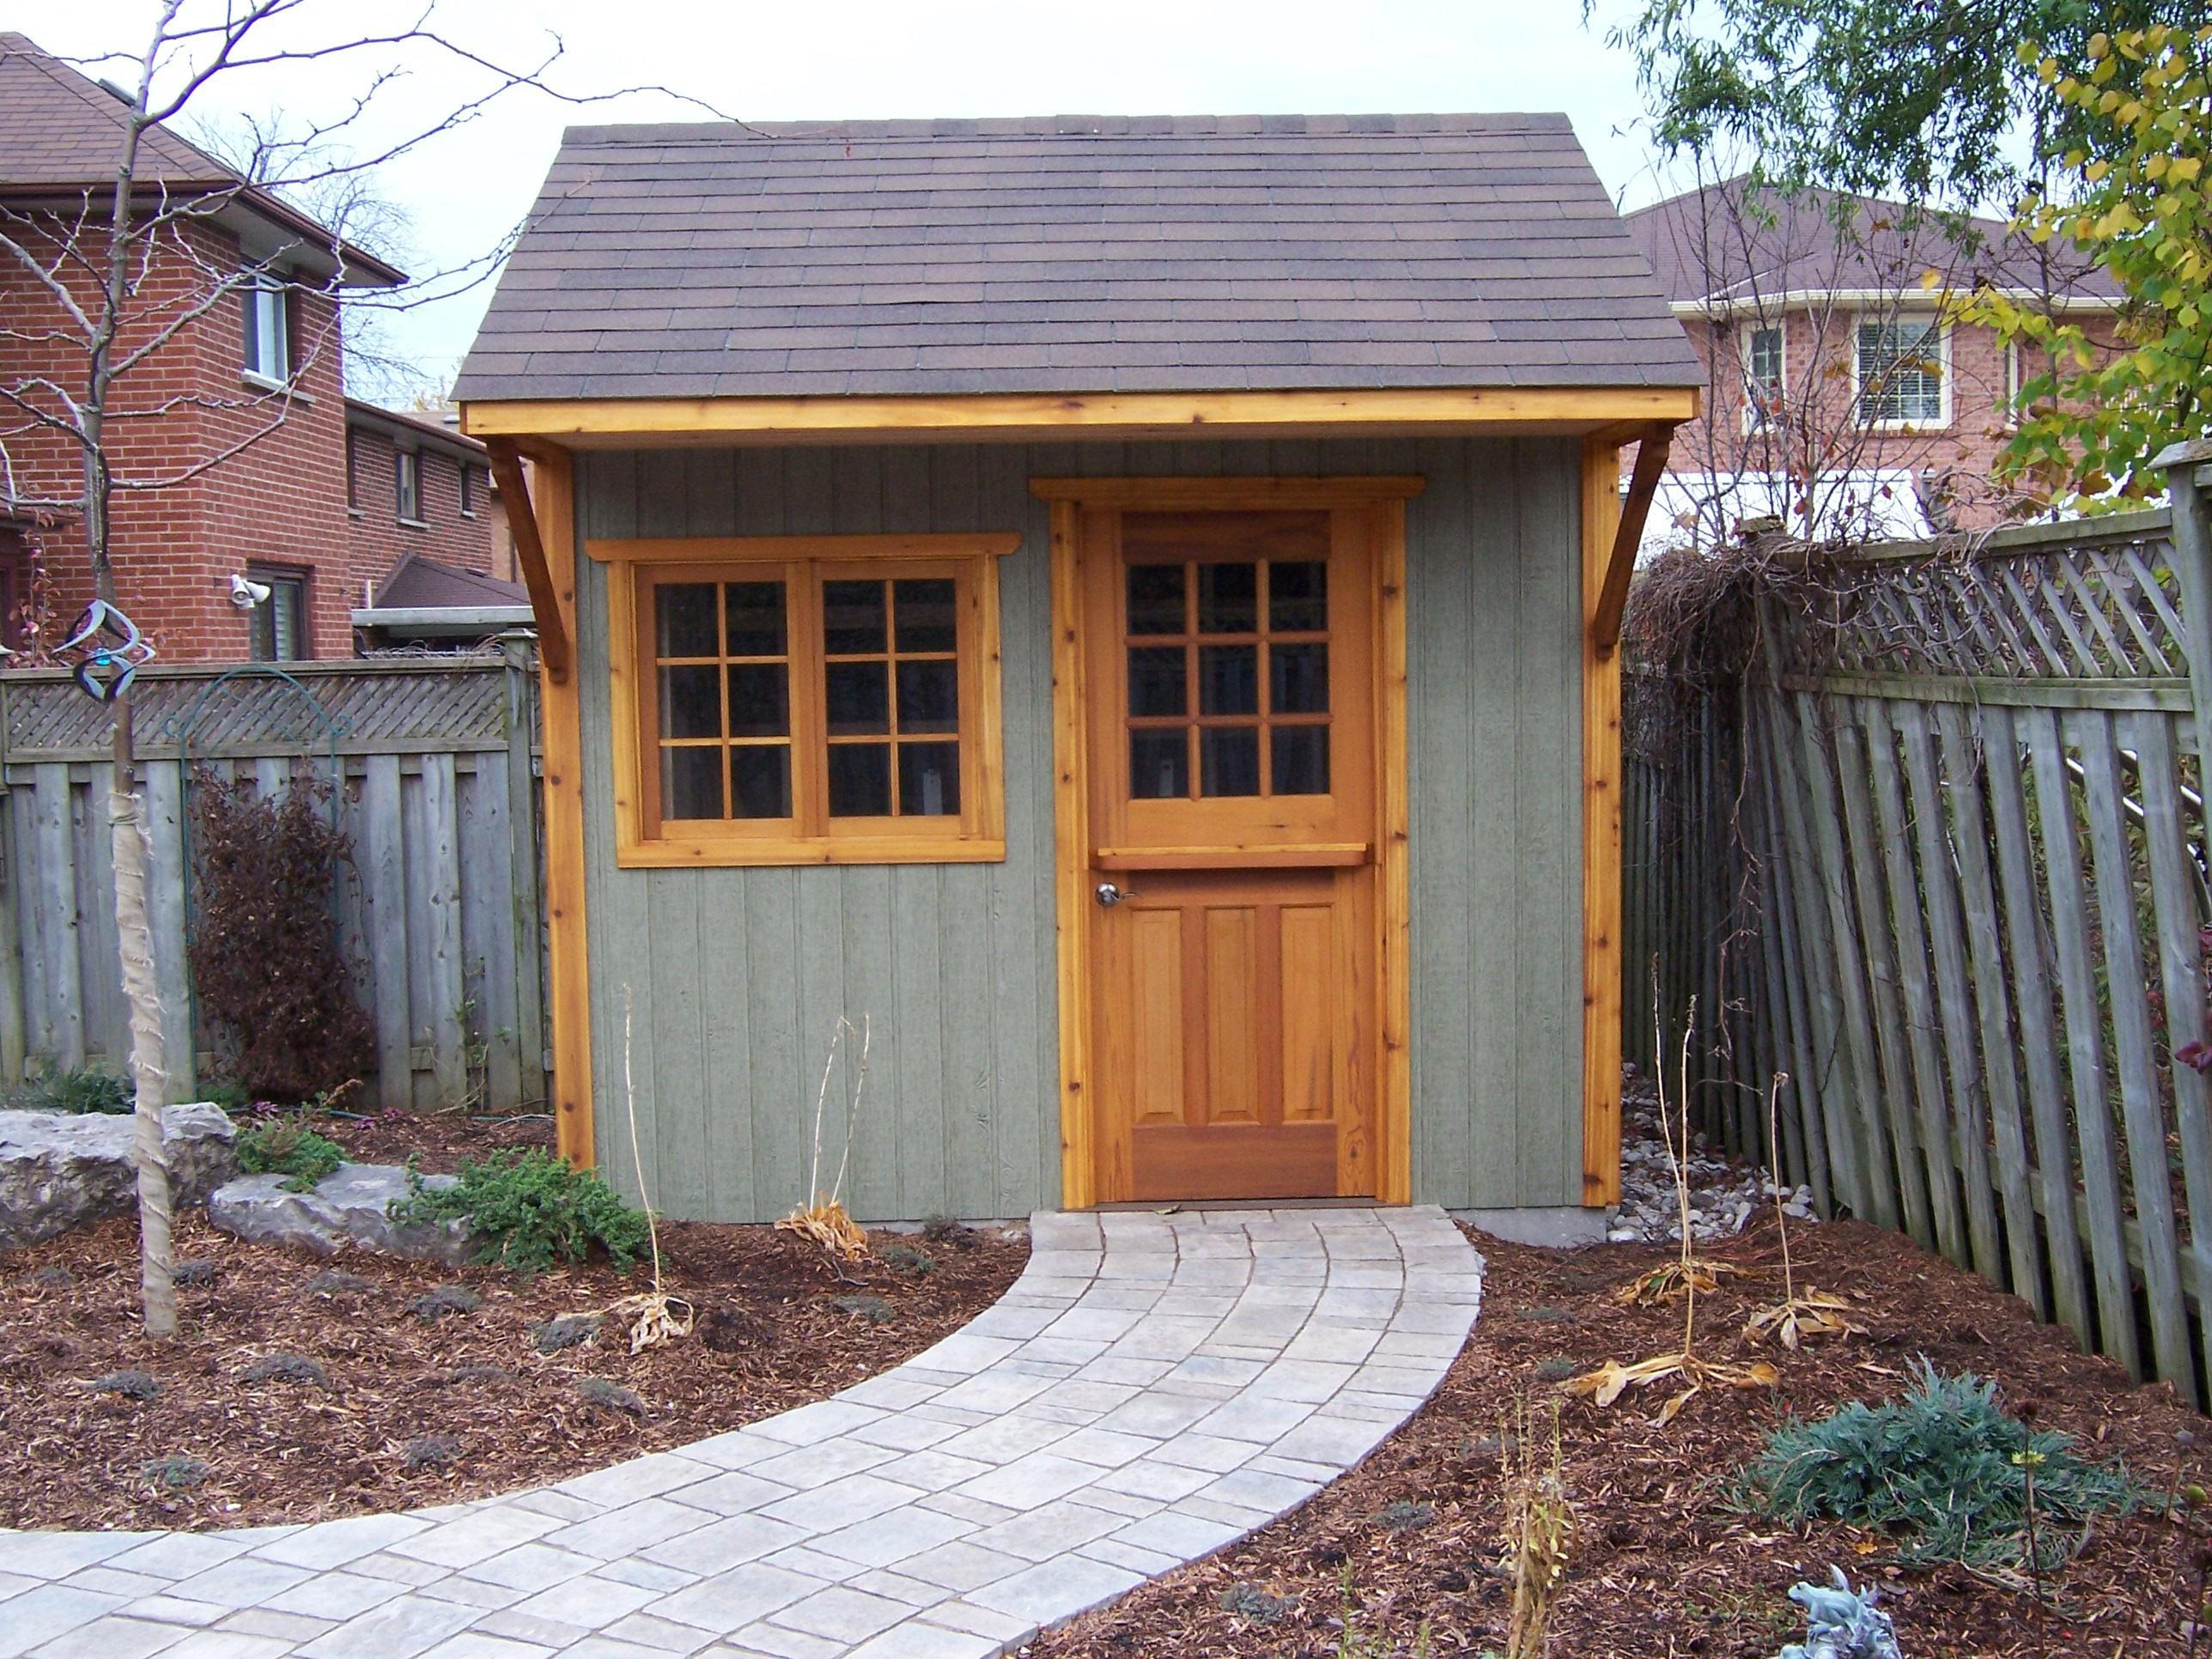 Canexel Glen Echo garden shed with bar window in Toronto Ontario. ID number 185988-1